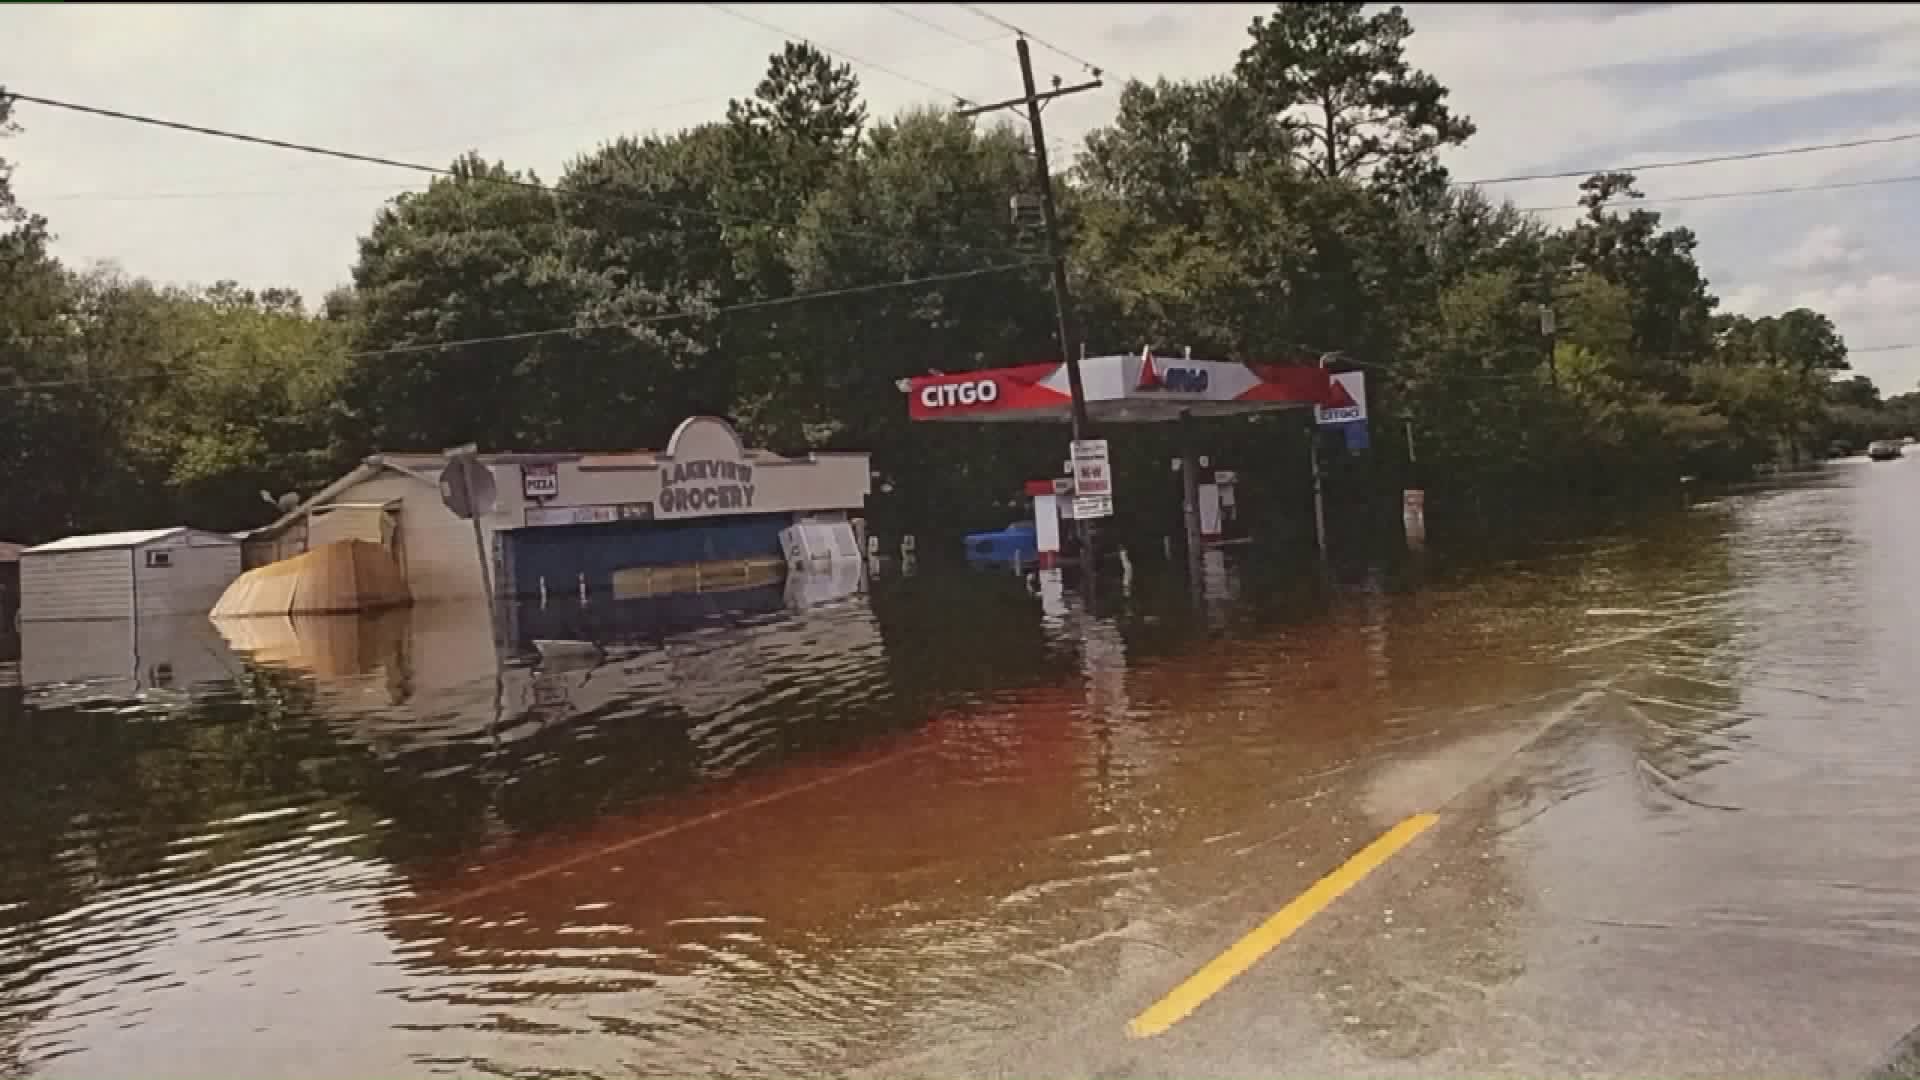 Pocono Townships Adopt Texas City, Help with Flood Recovery